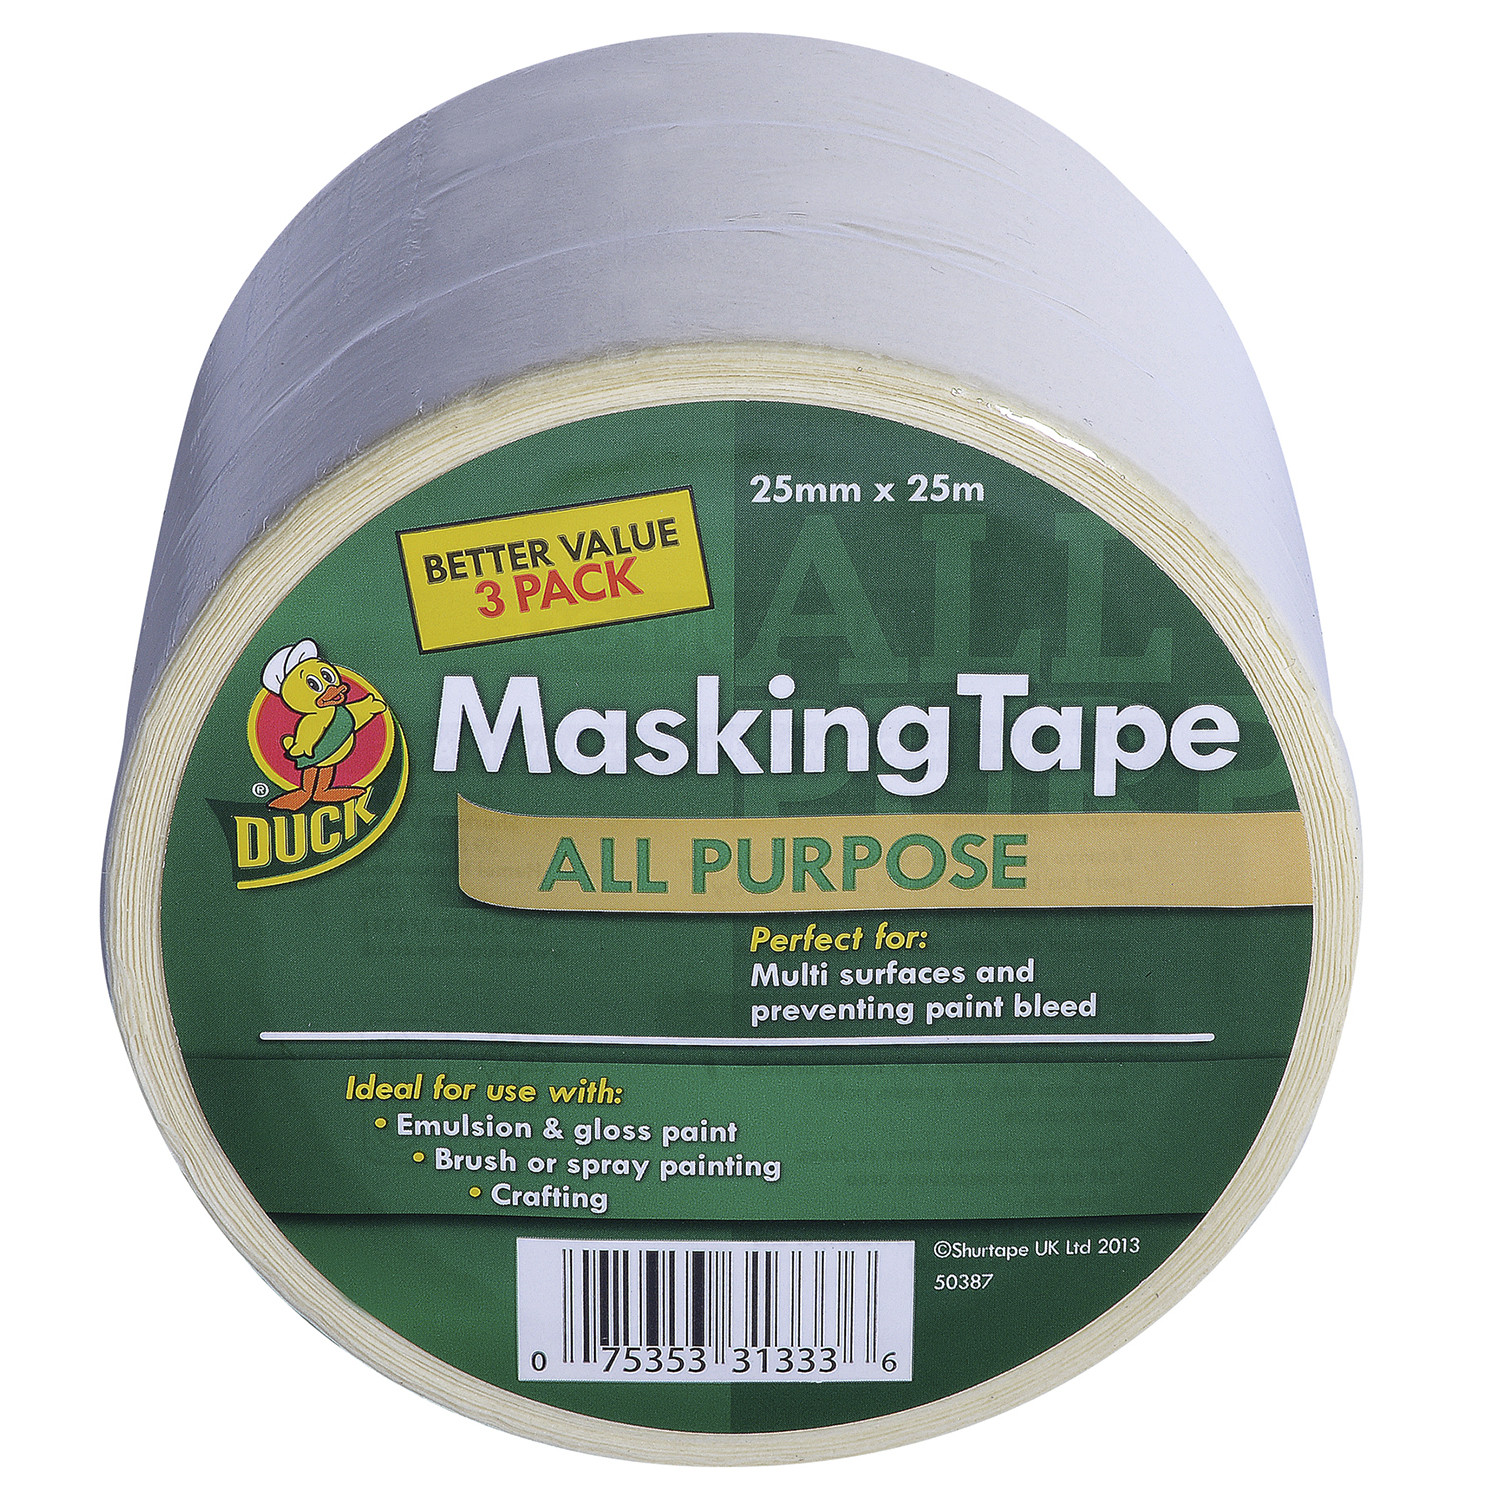 Duck 25mm x 25m All Purpose Masking Tape 3 Pack Image 1